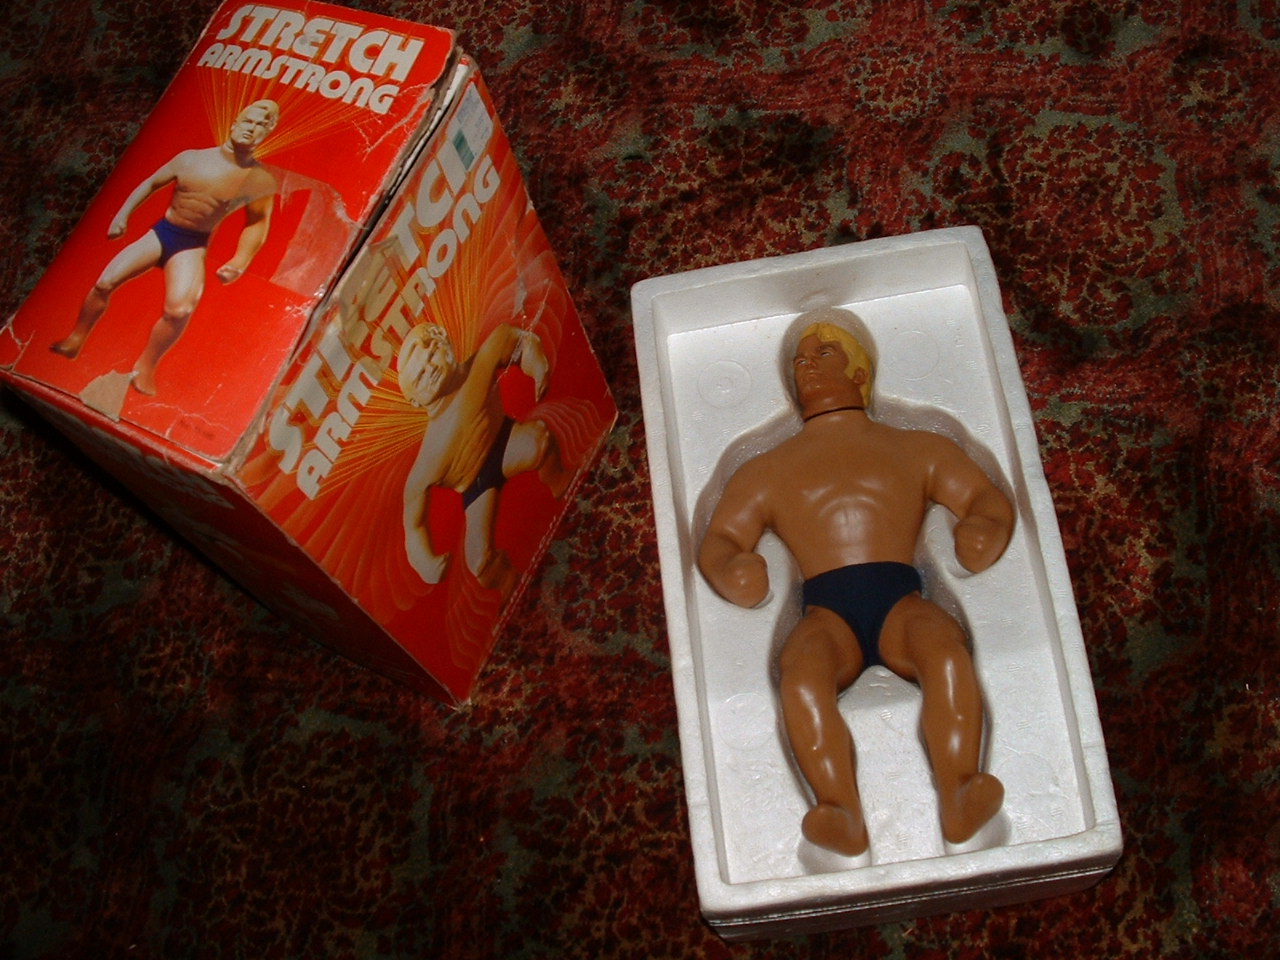 Stretch Arm-Strong was a classic toy.